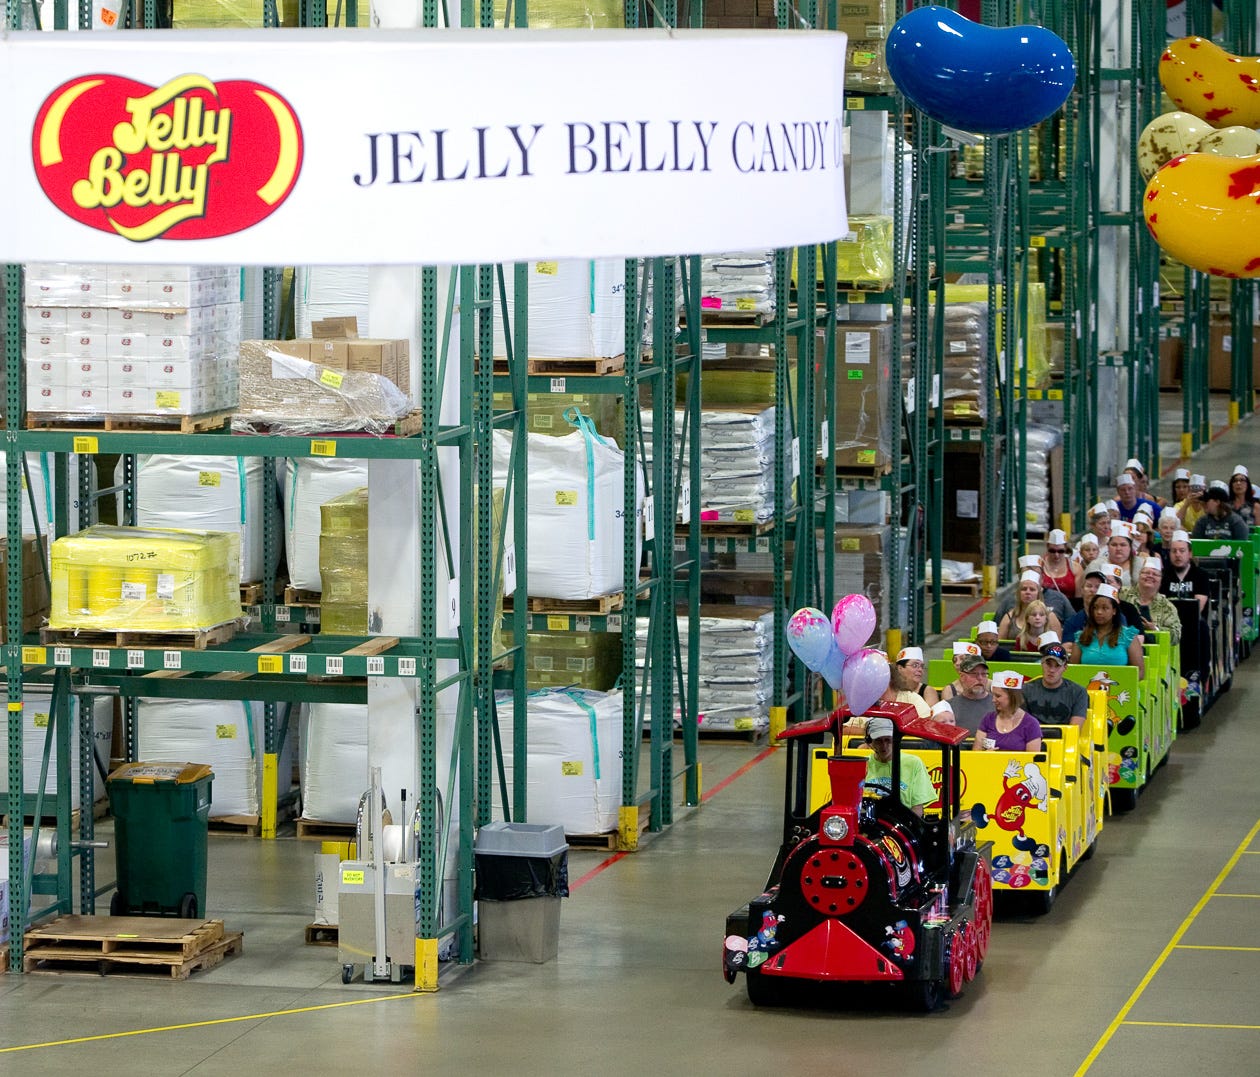 Wisconsin: In Pleasant Prairie, Wis., free candy makes your trip even more pleasant. Every day, the Jelly Belly Visitor Center and the Jelly Belly Express Train Tour whisk visitors through a free, 25-minute ride that explores production process of tr